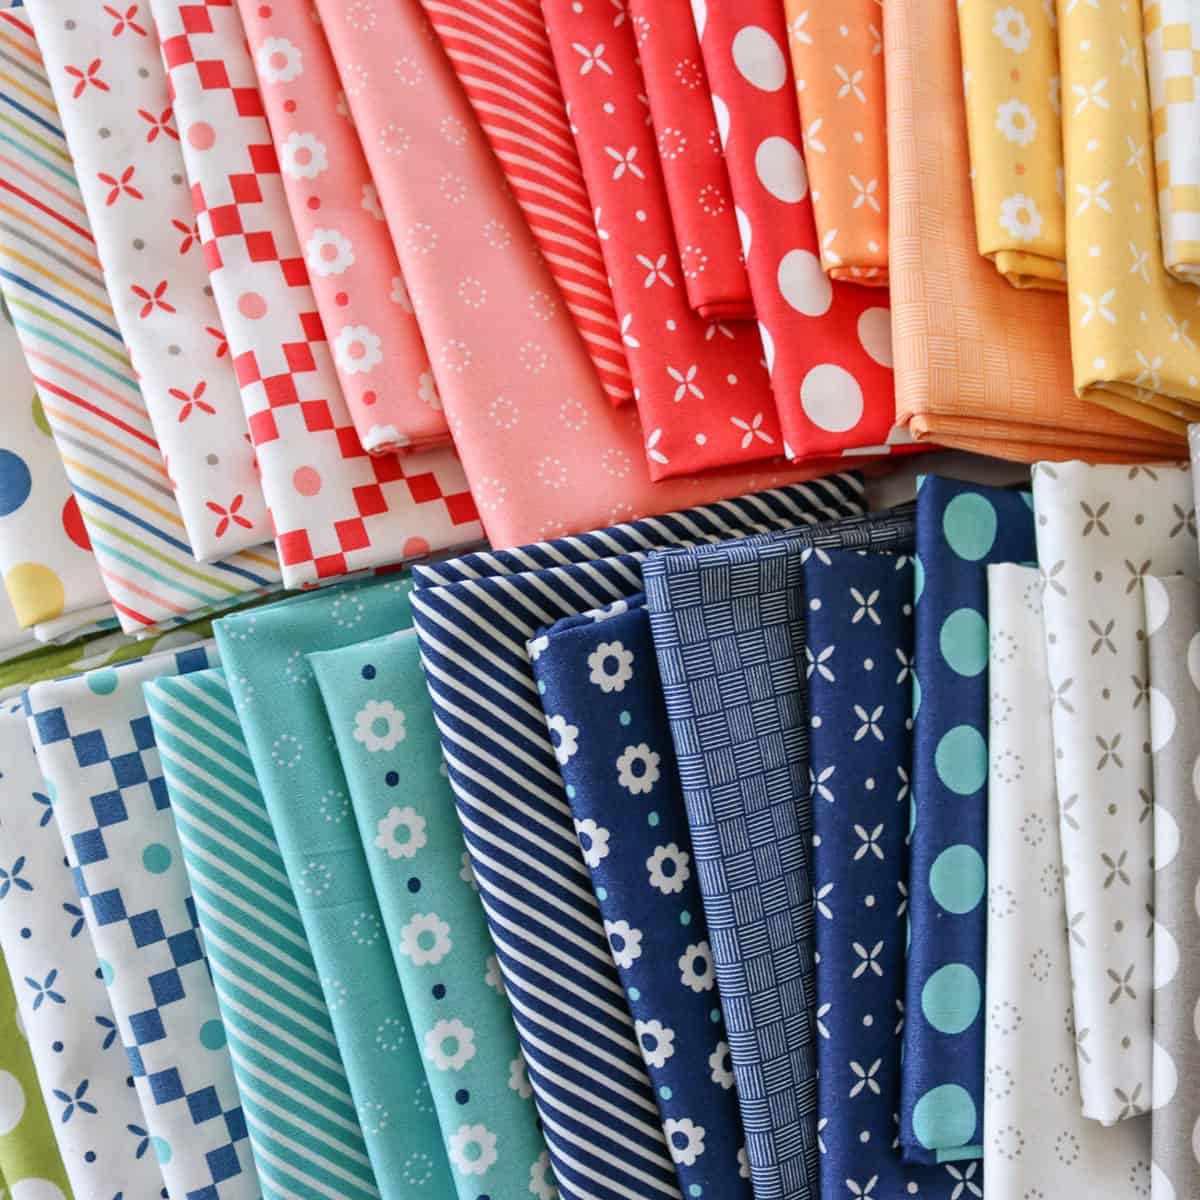 5 Decluttering Tips to Help Purge a Fabric Stash featured by Top US Quilt Blog, A Quilting Life